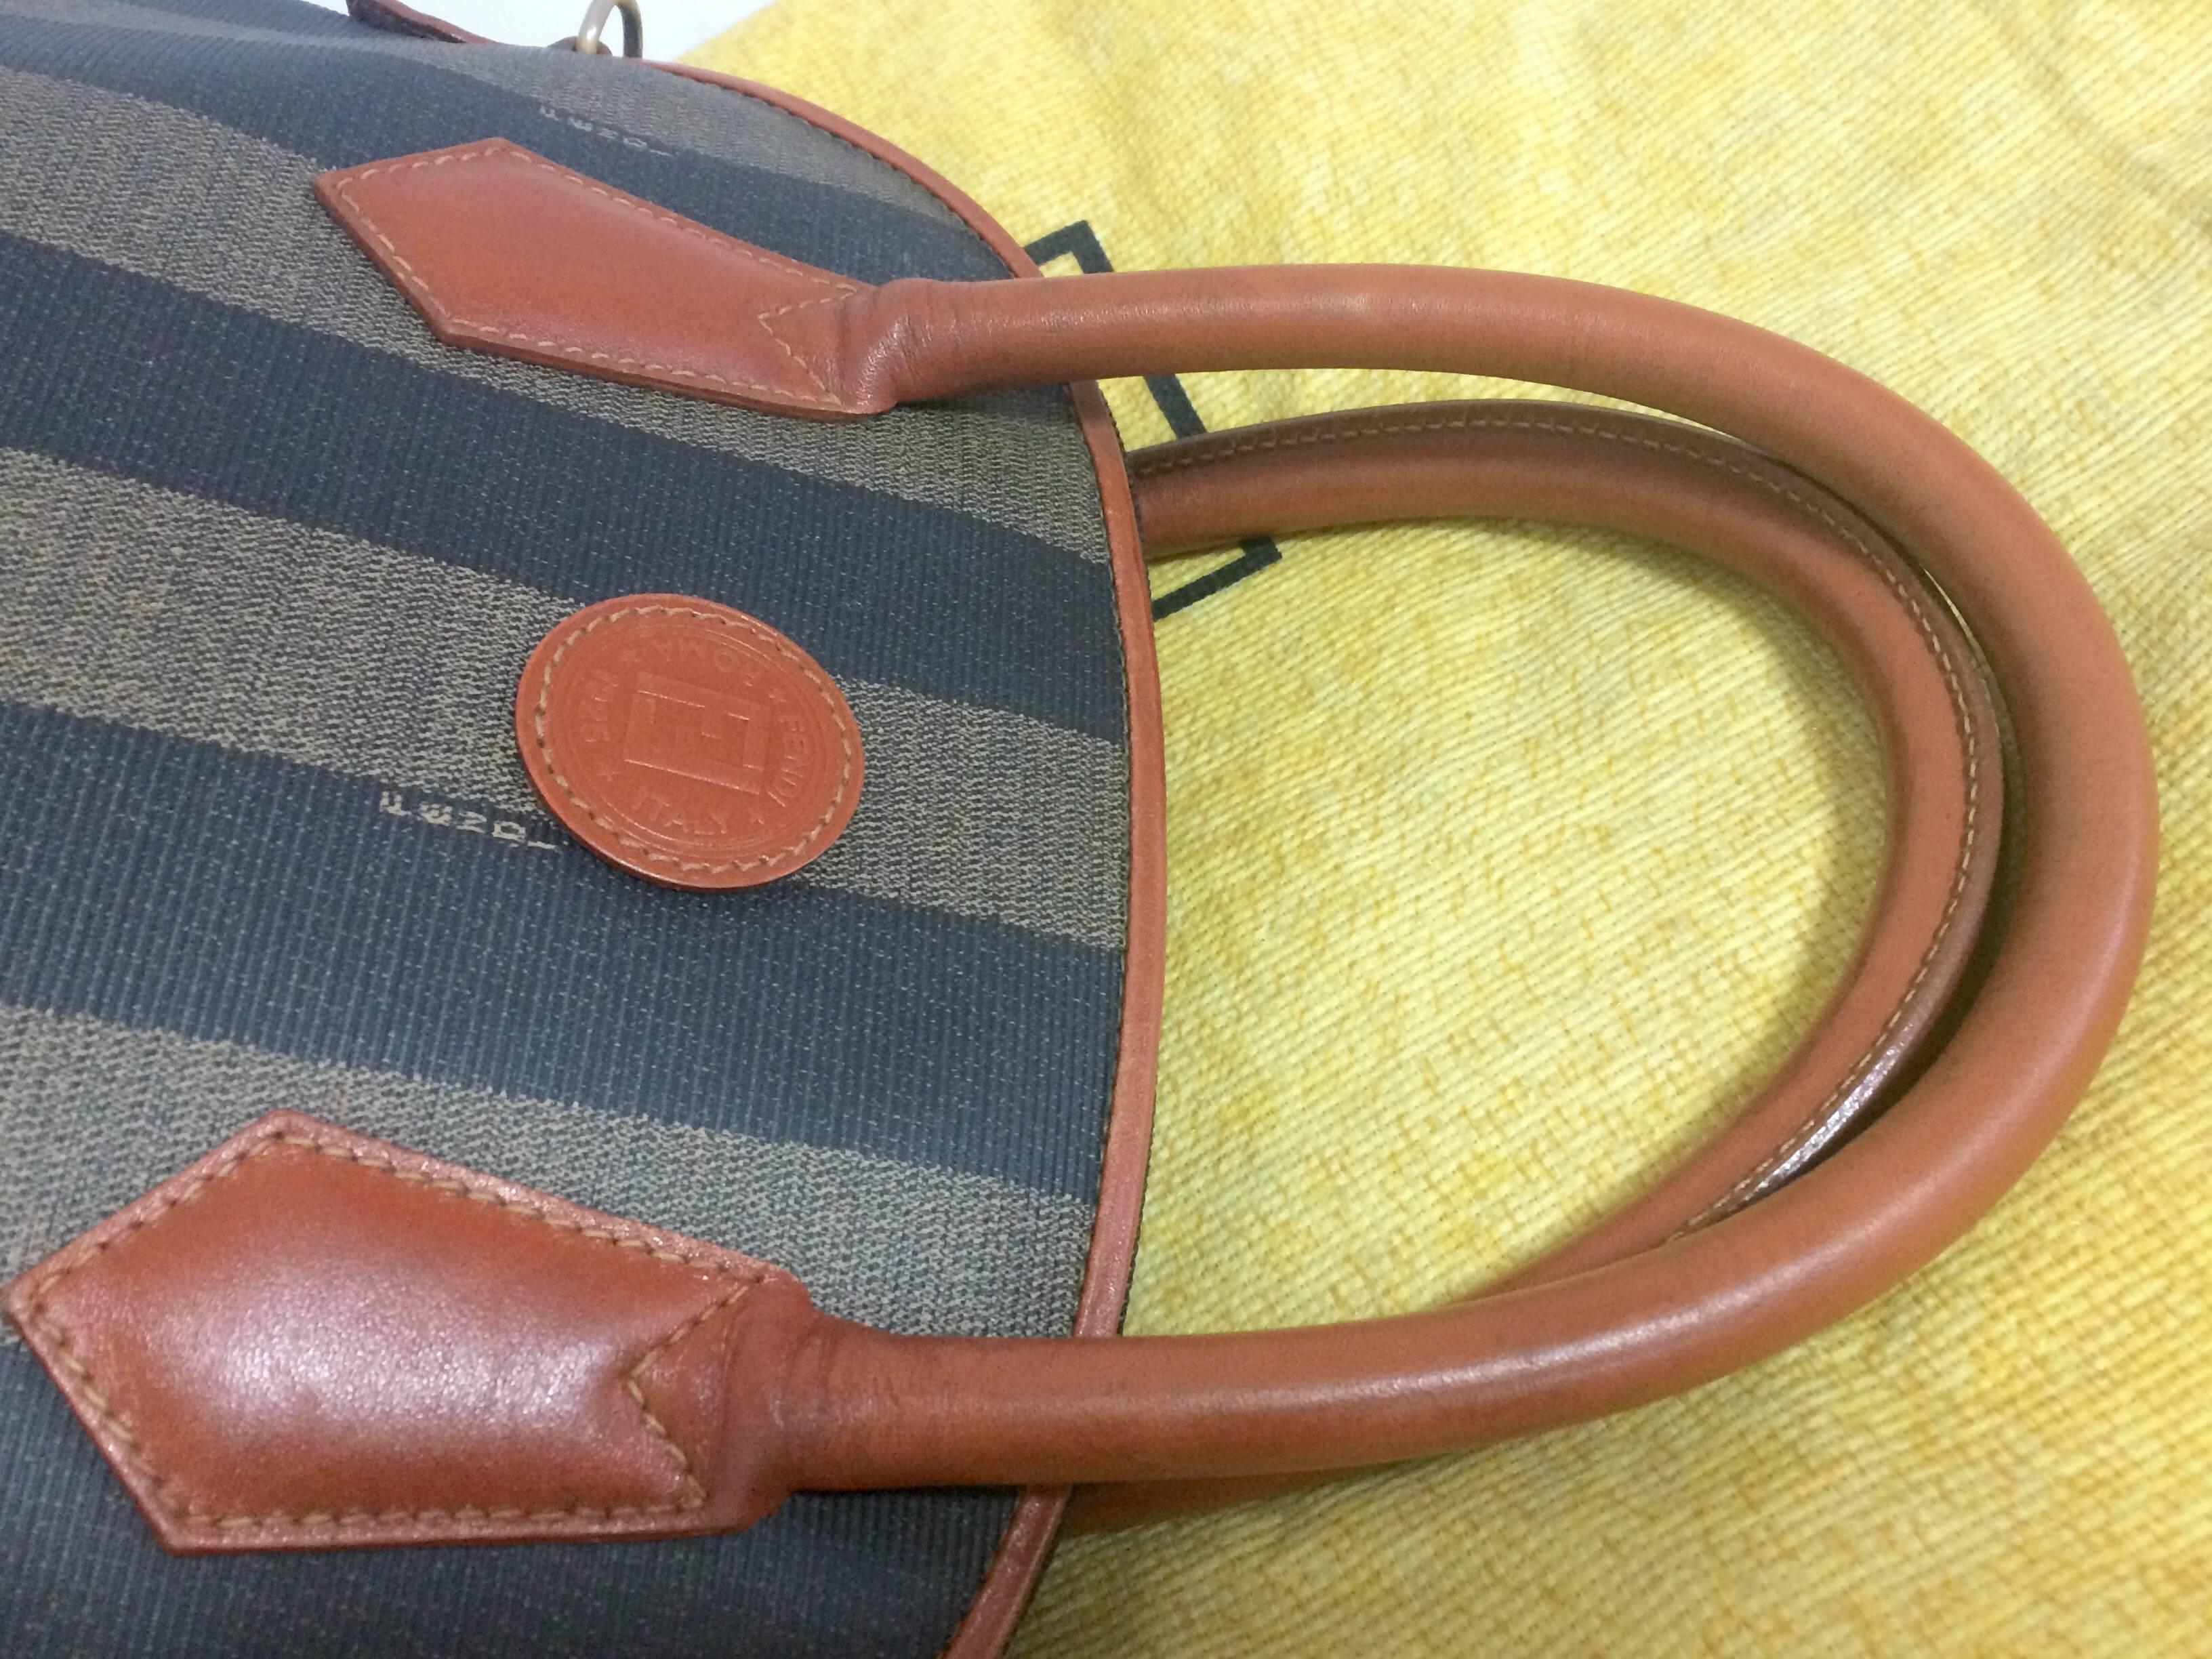 Women's Vintage FENDI pecan khaki and gray stripe bolide bag with brown leather handles.